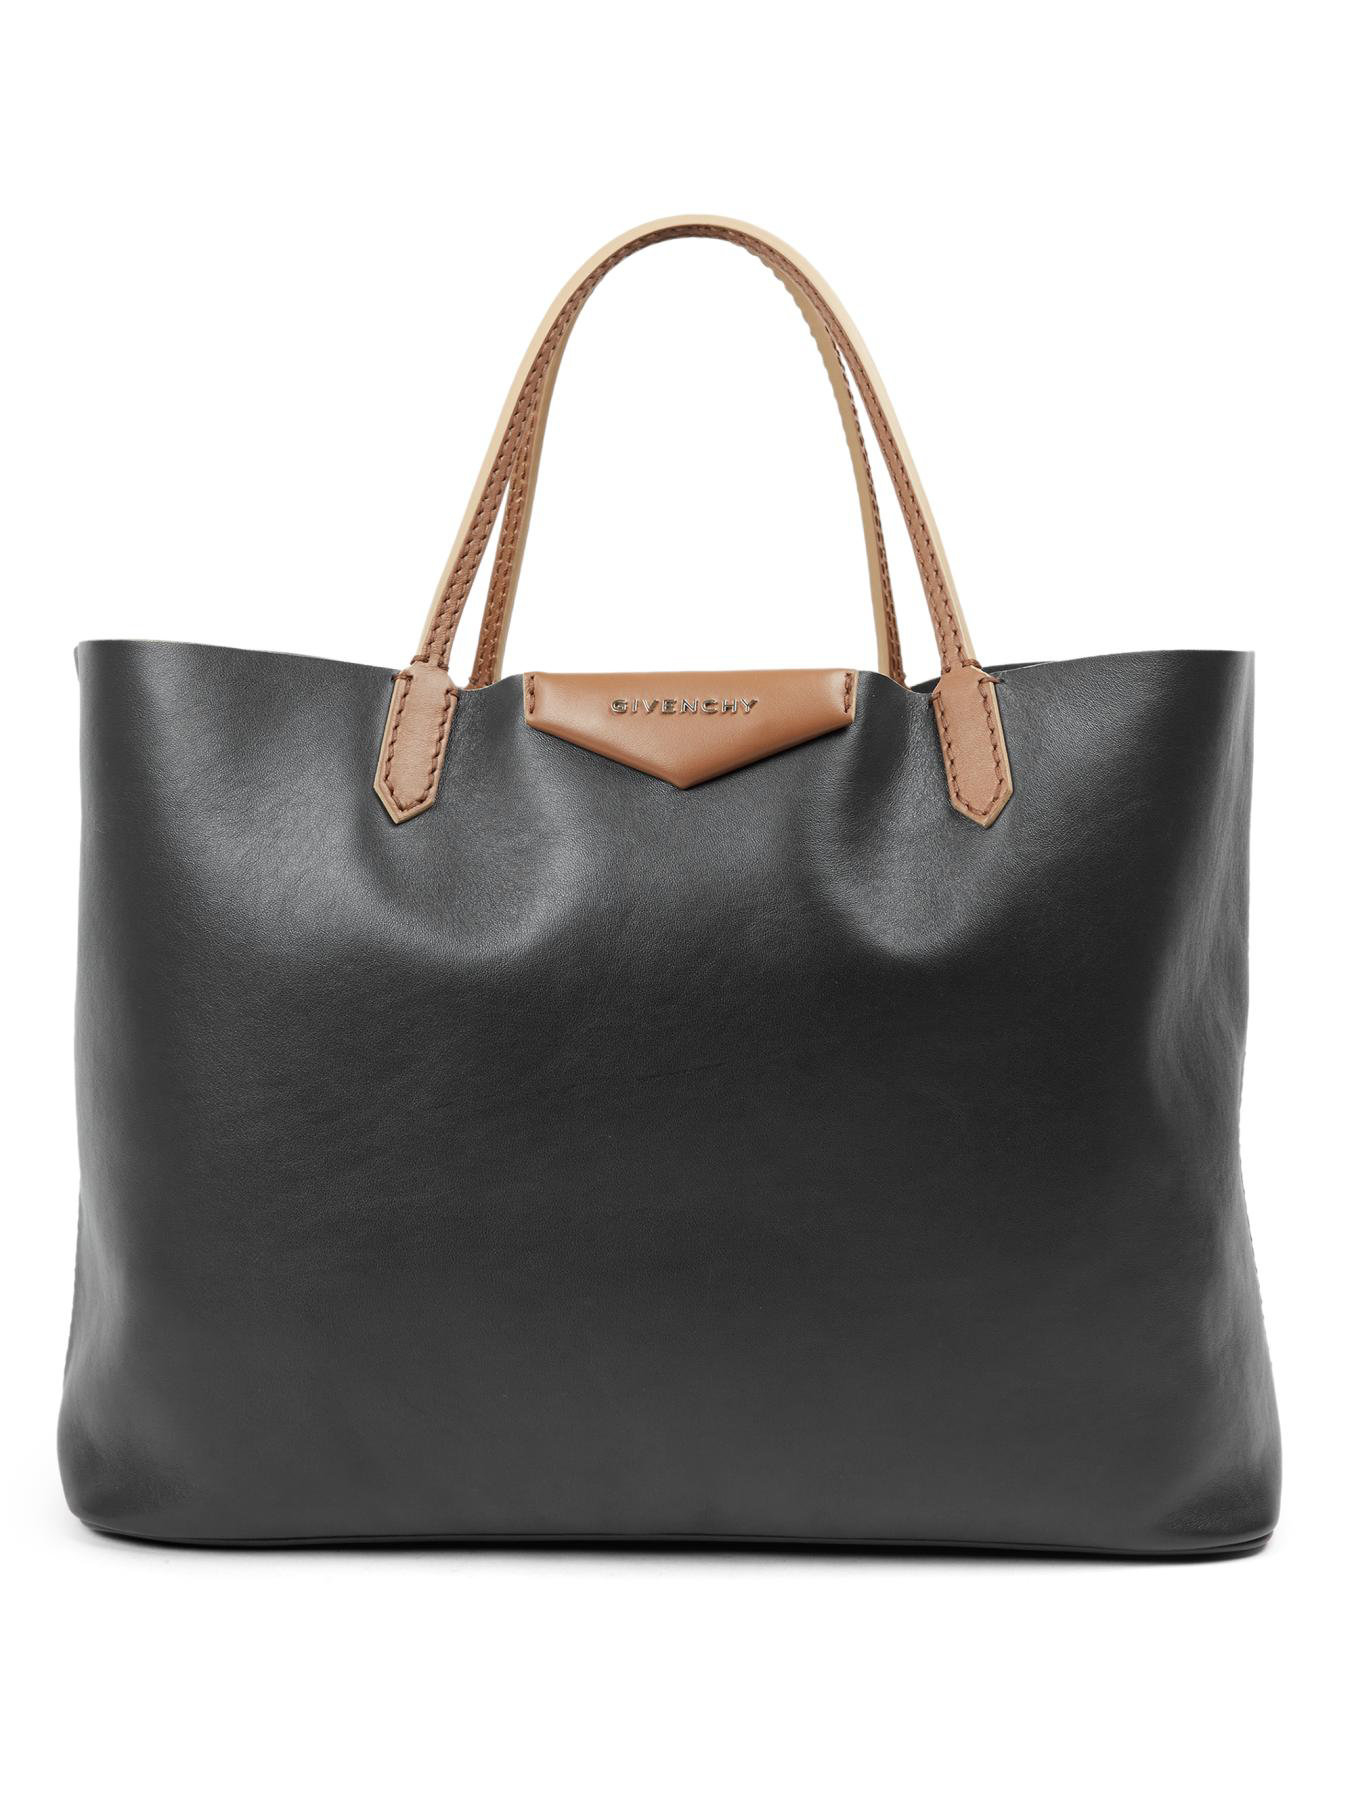 Lyst - Givenchy Antigona Large Two-tone Leather Tote in Black